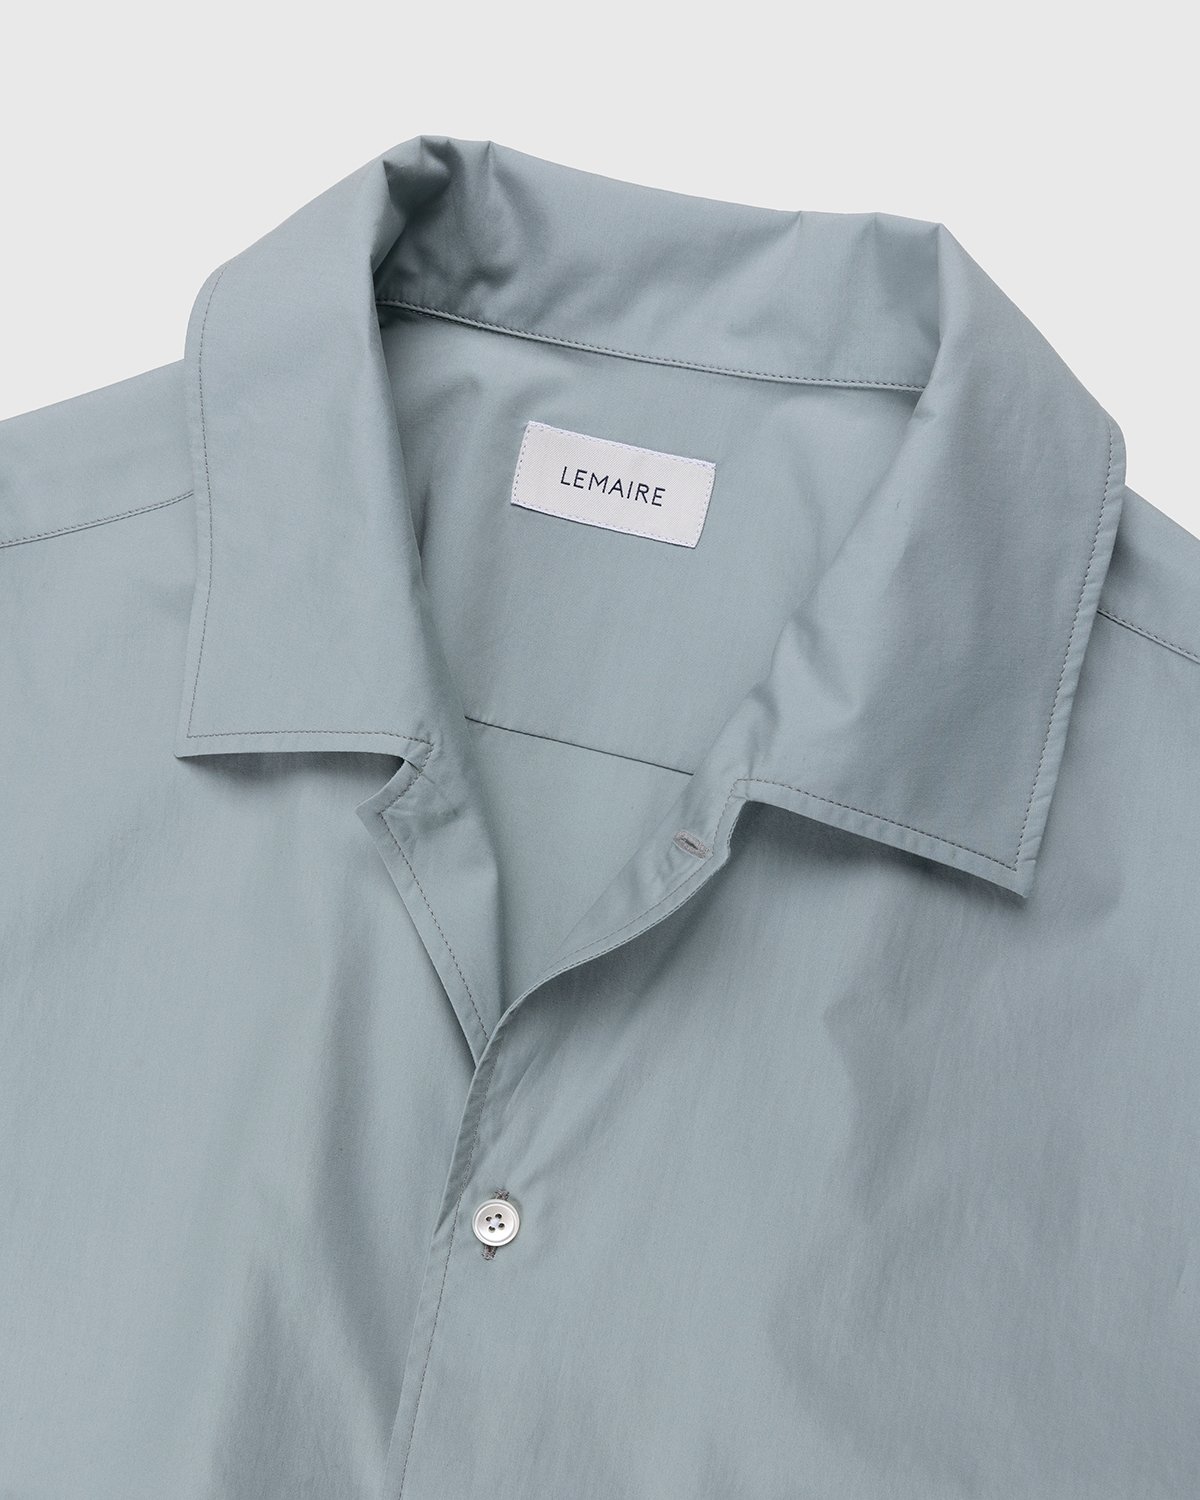 Lemaire - Convertible Collar Long Sleeve Shirt Light Blue - Clothing - White - Image 4